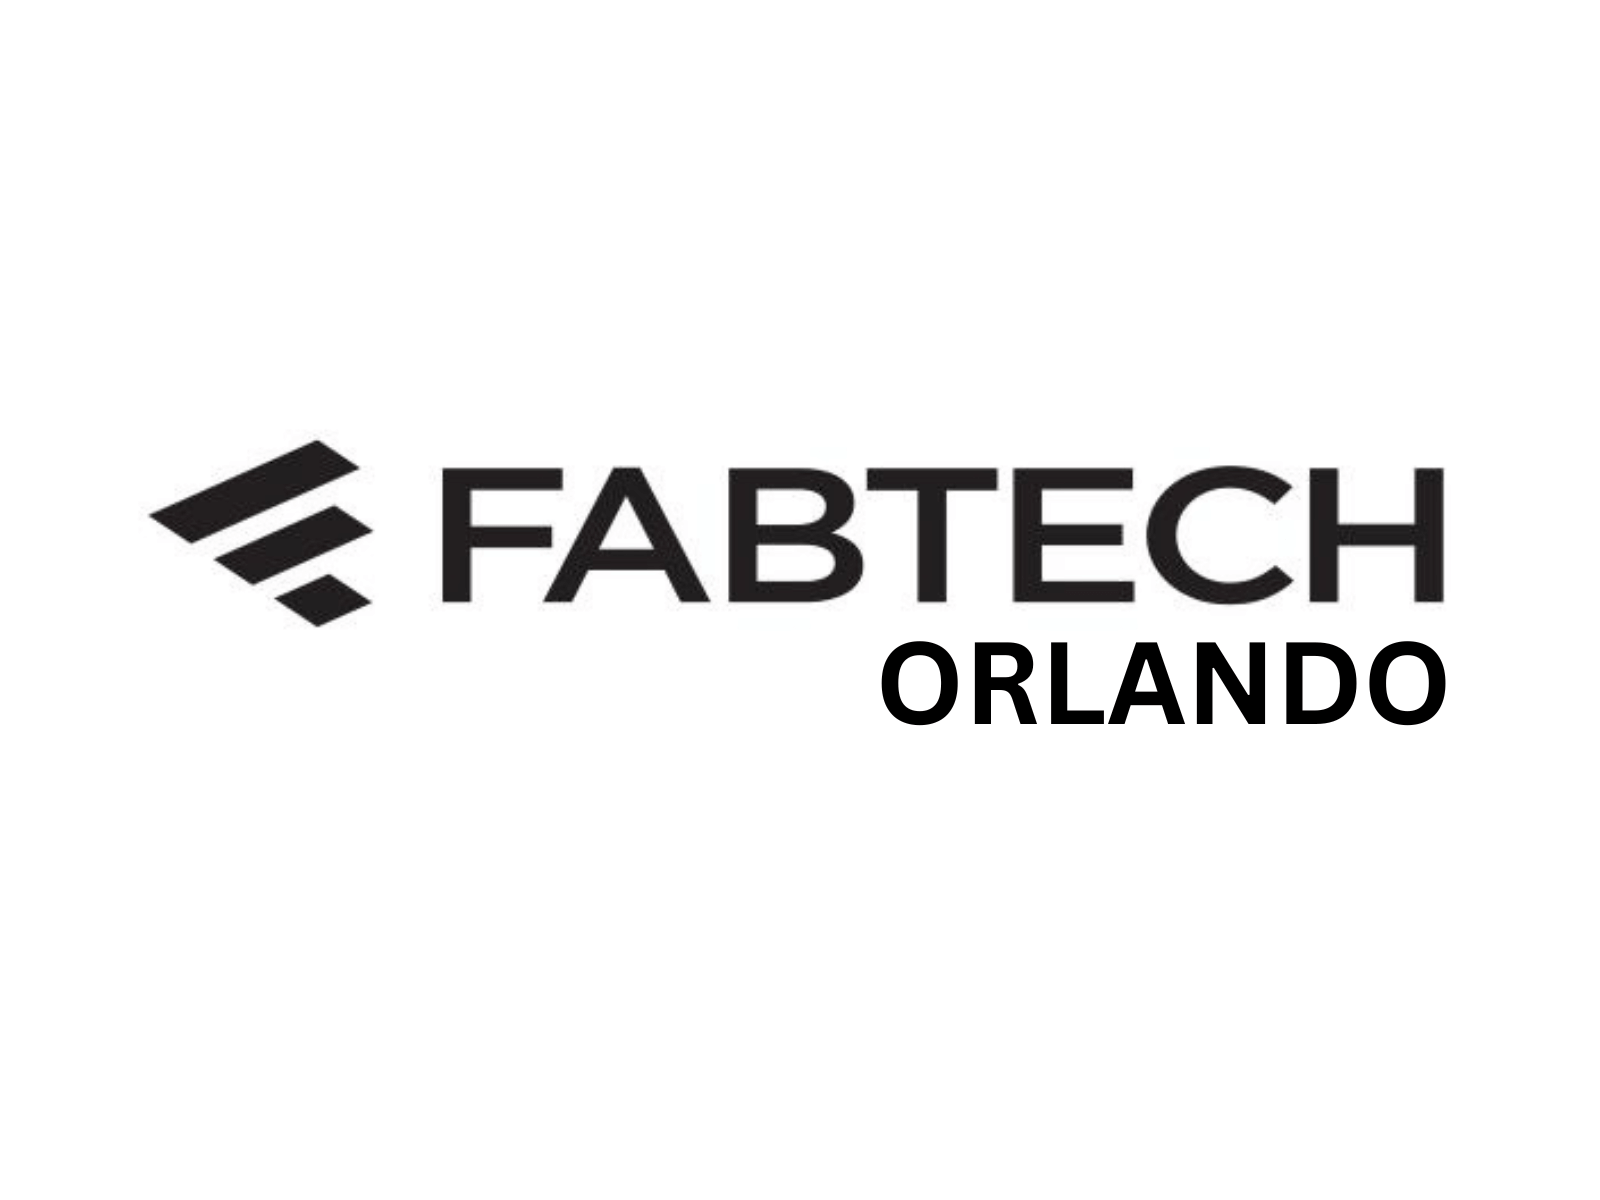 Fabtech Orlando Exhibition Stand Designers And Builders || Interior Today